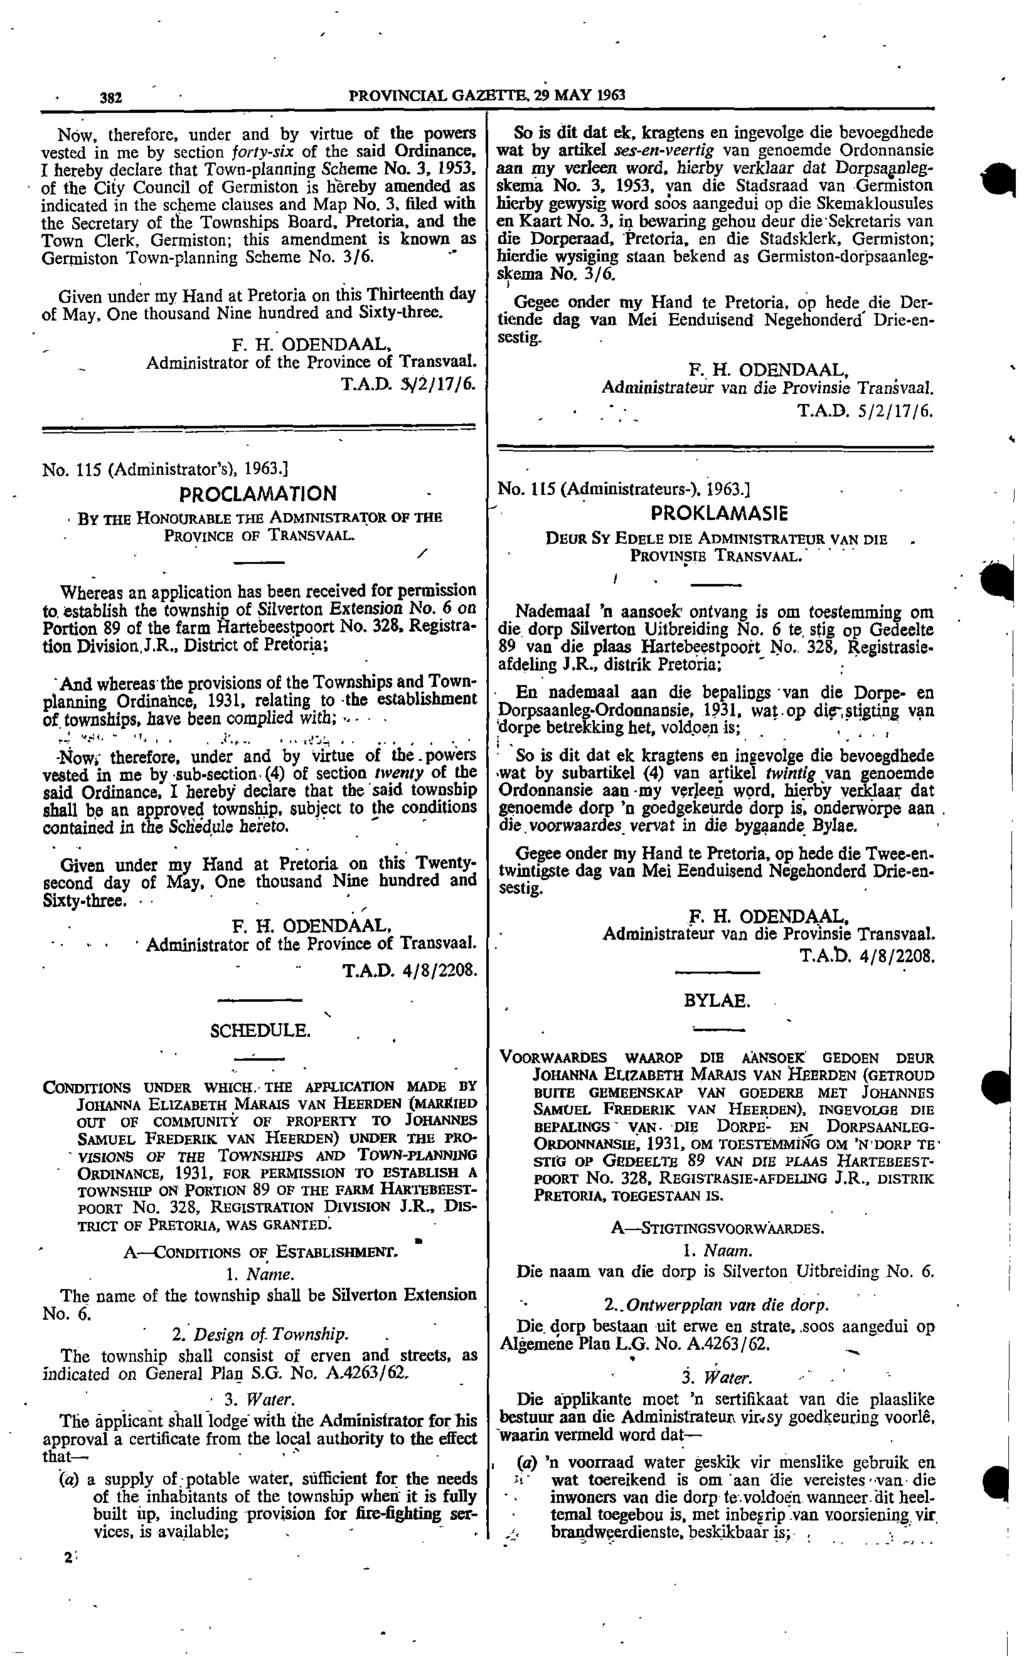 382 PROVNCAL GAZETTE 29 MAY 1963 Now therefore under and by virtue of the powers So is dit dat ek kragtens en ingevolge die bevoegdhede vested in me by section fortysix of the said Ordinance wat by